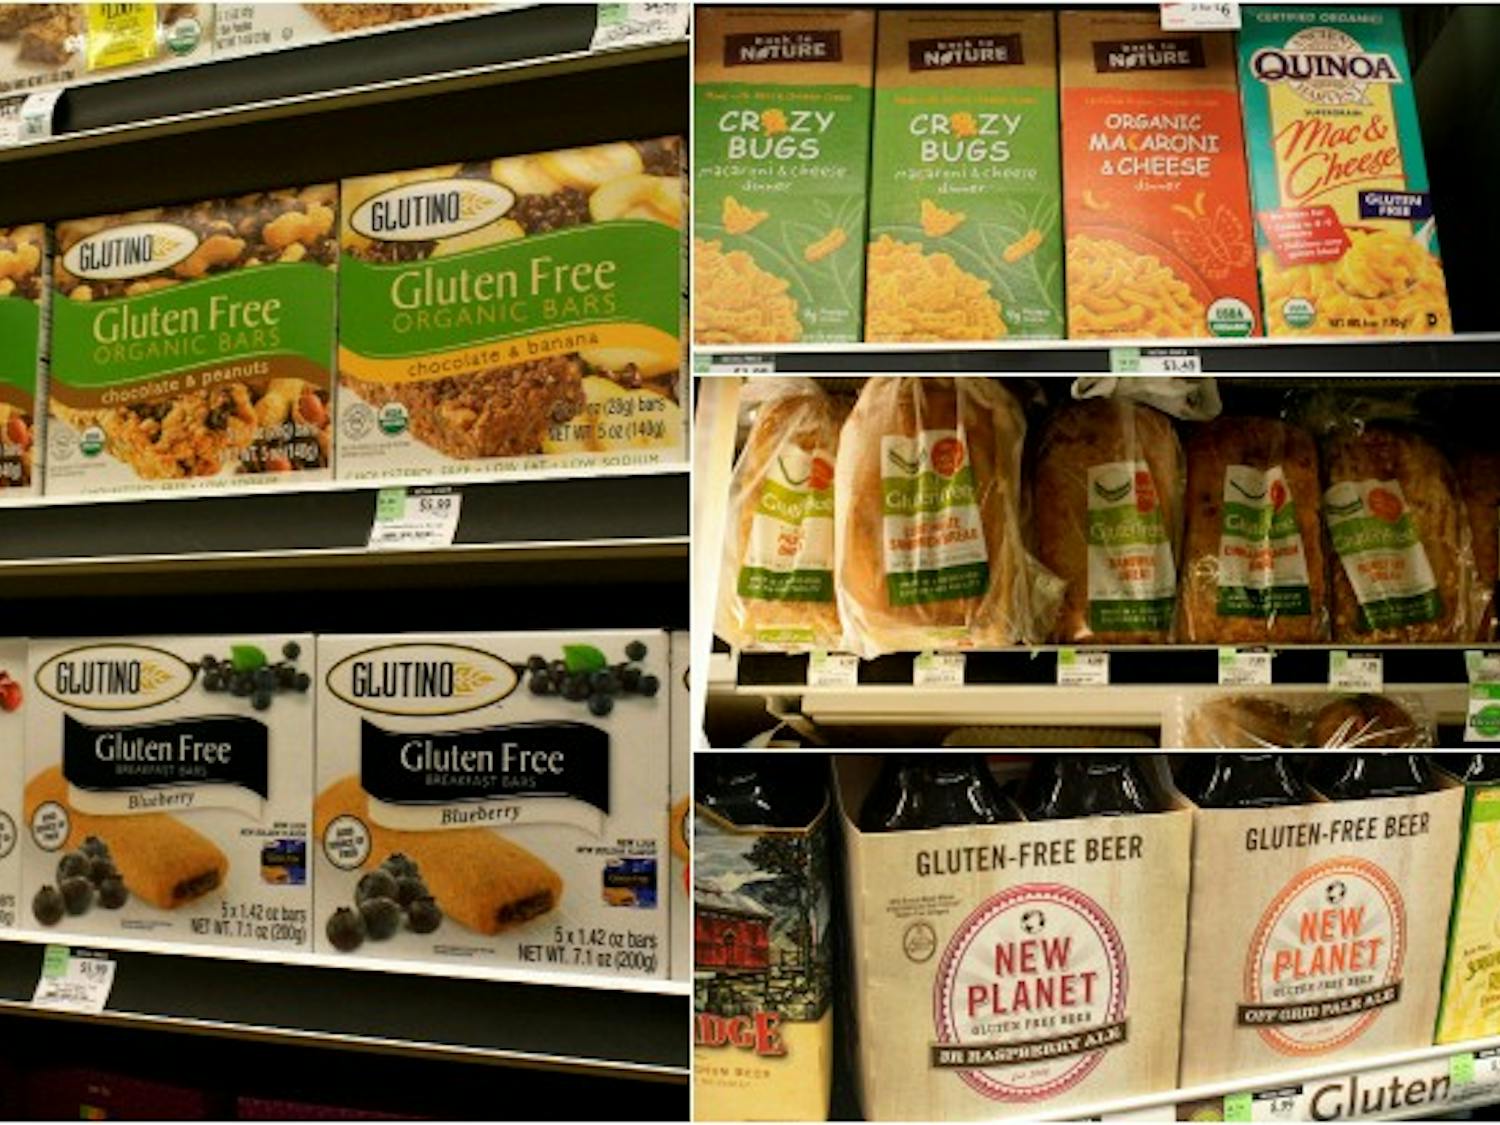 Many stores have increased their selections in gluten-free items. Photo by Stephanie Pellicano